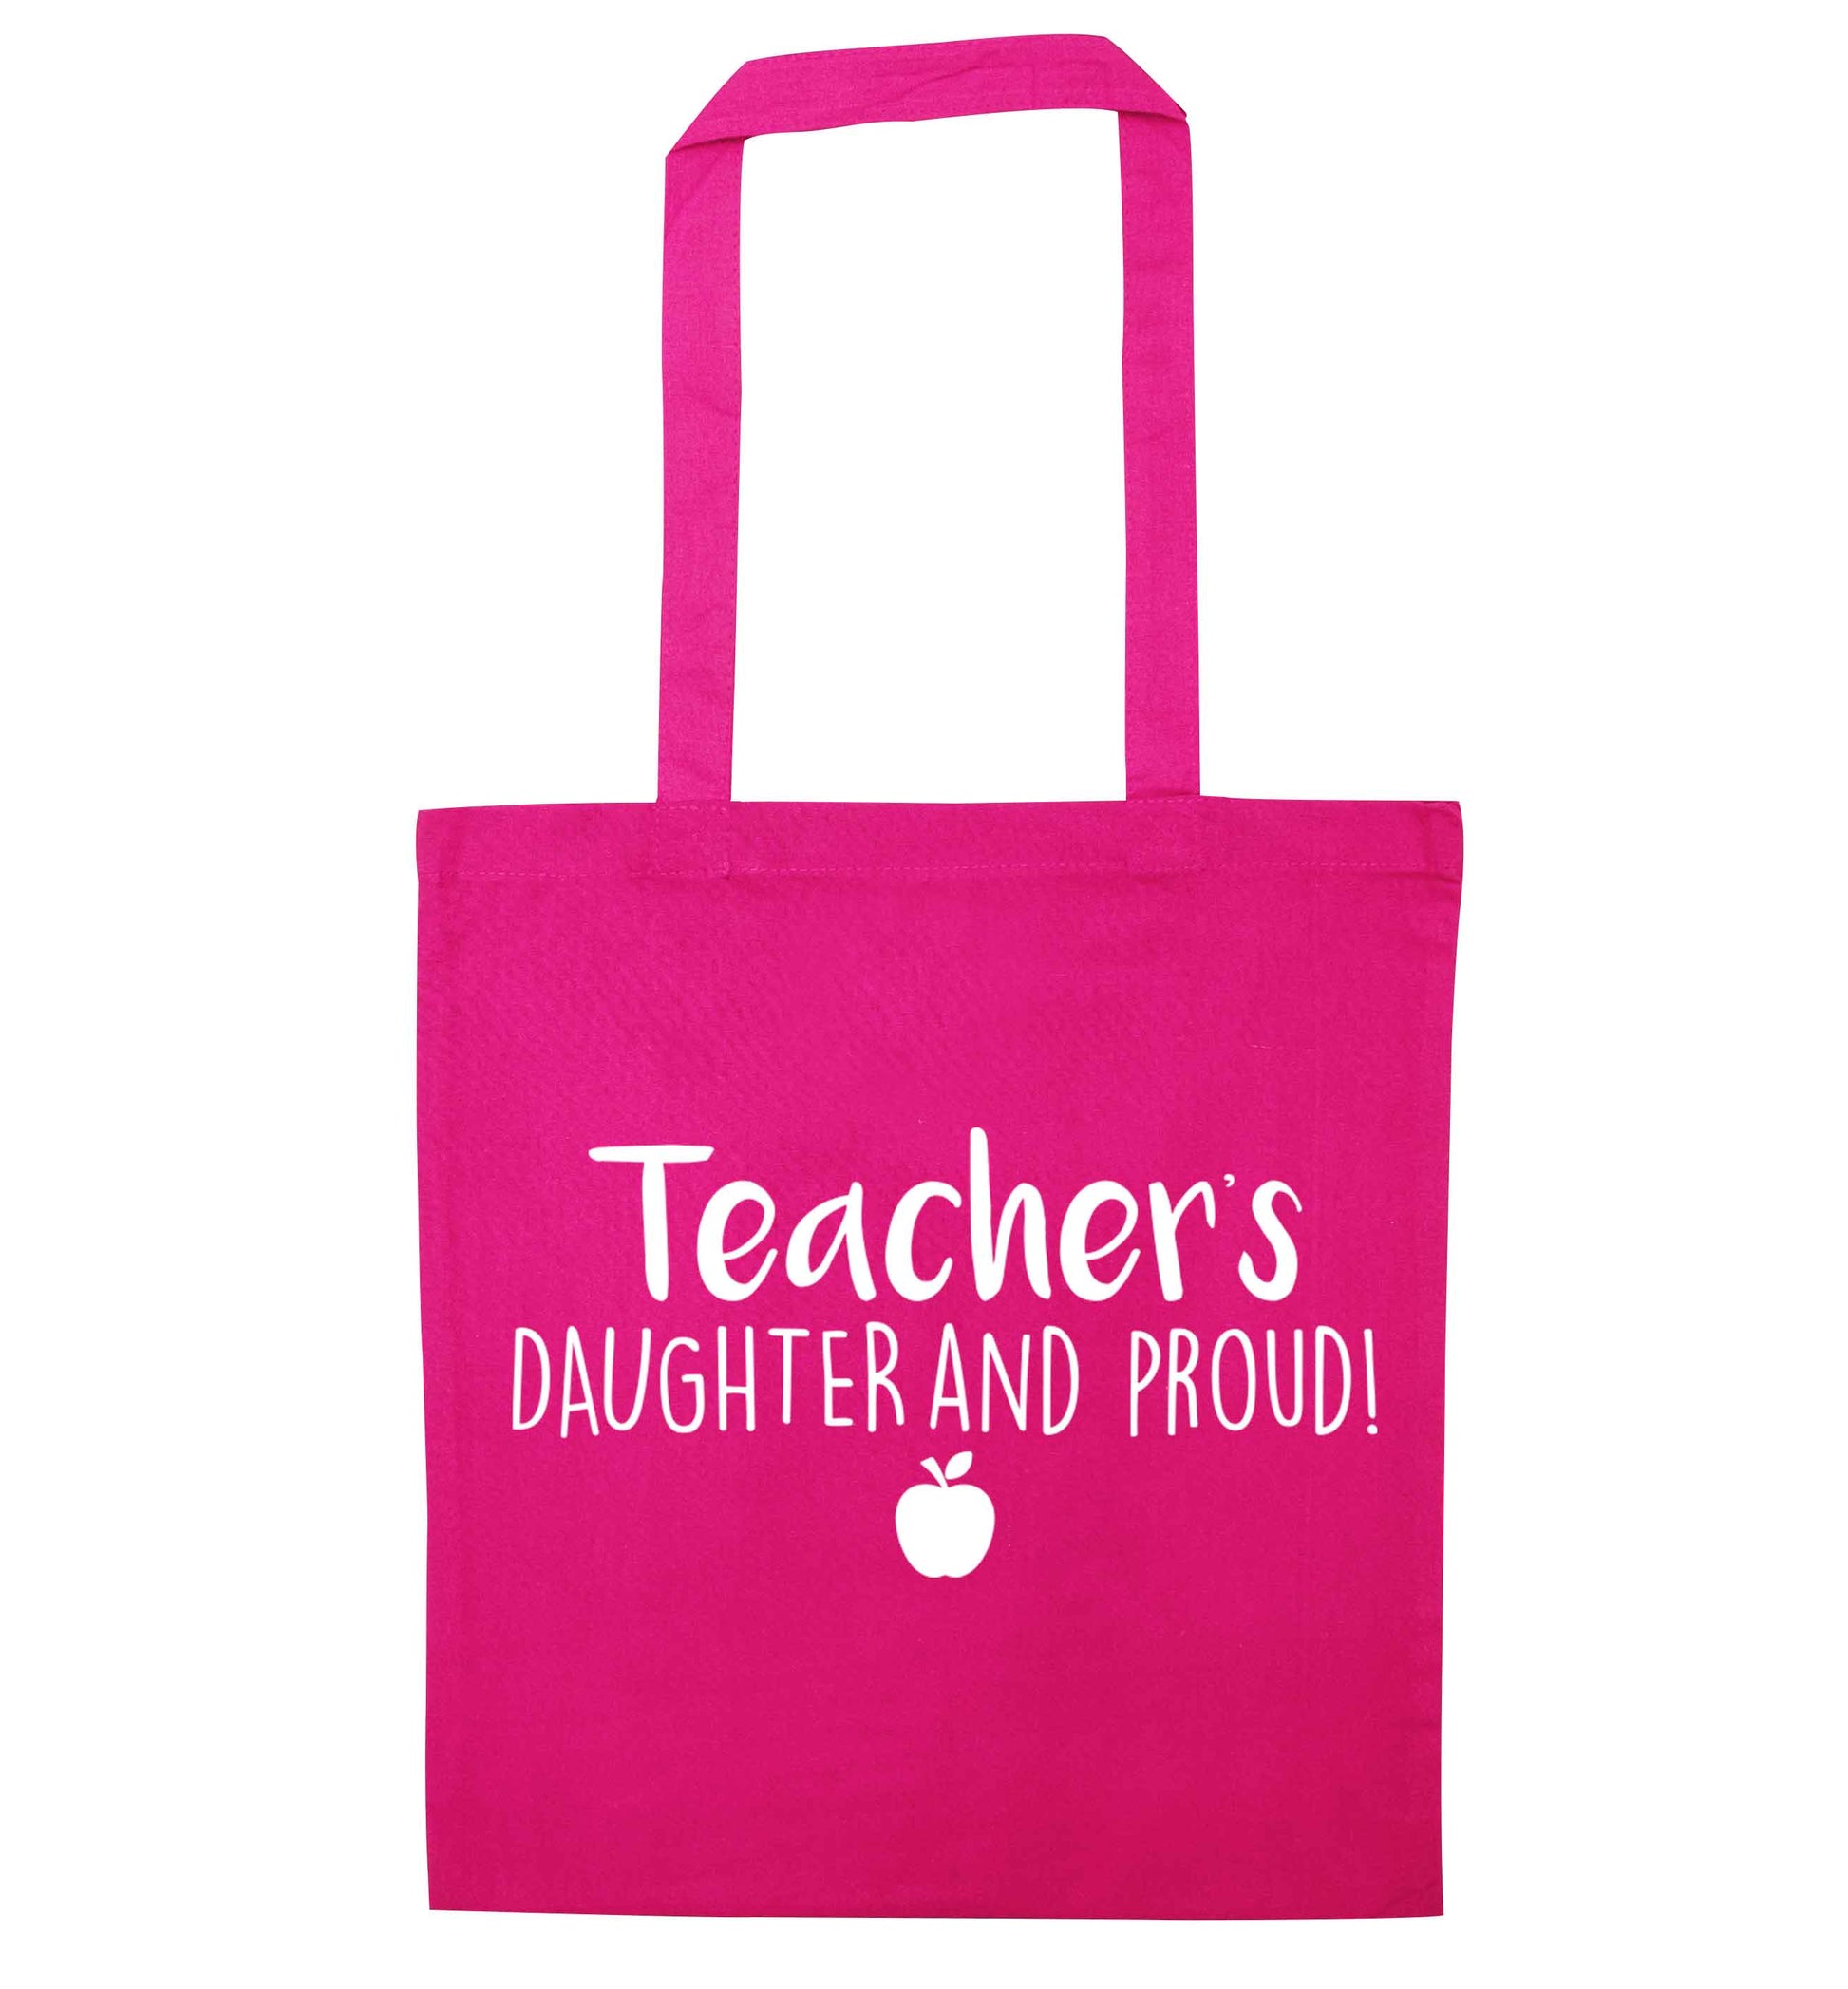 Teachers daughter and proud pink tote bag